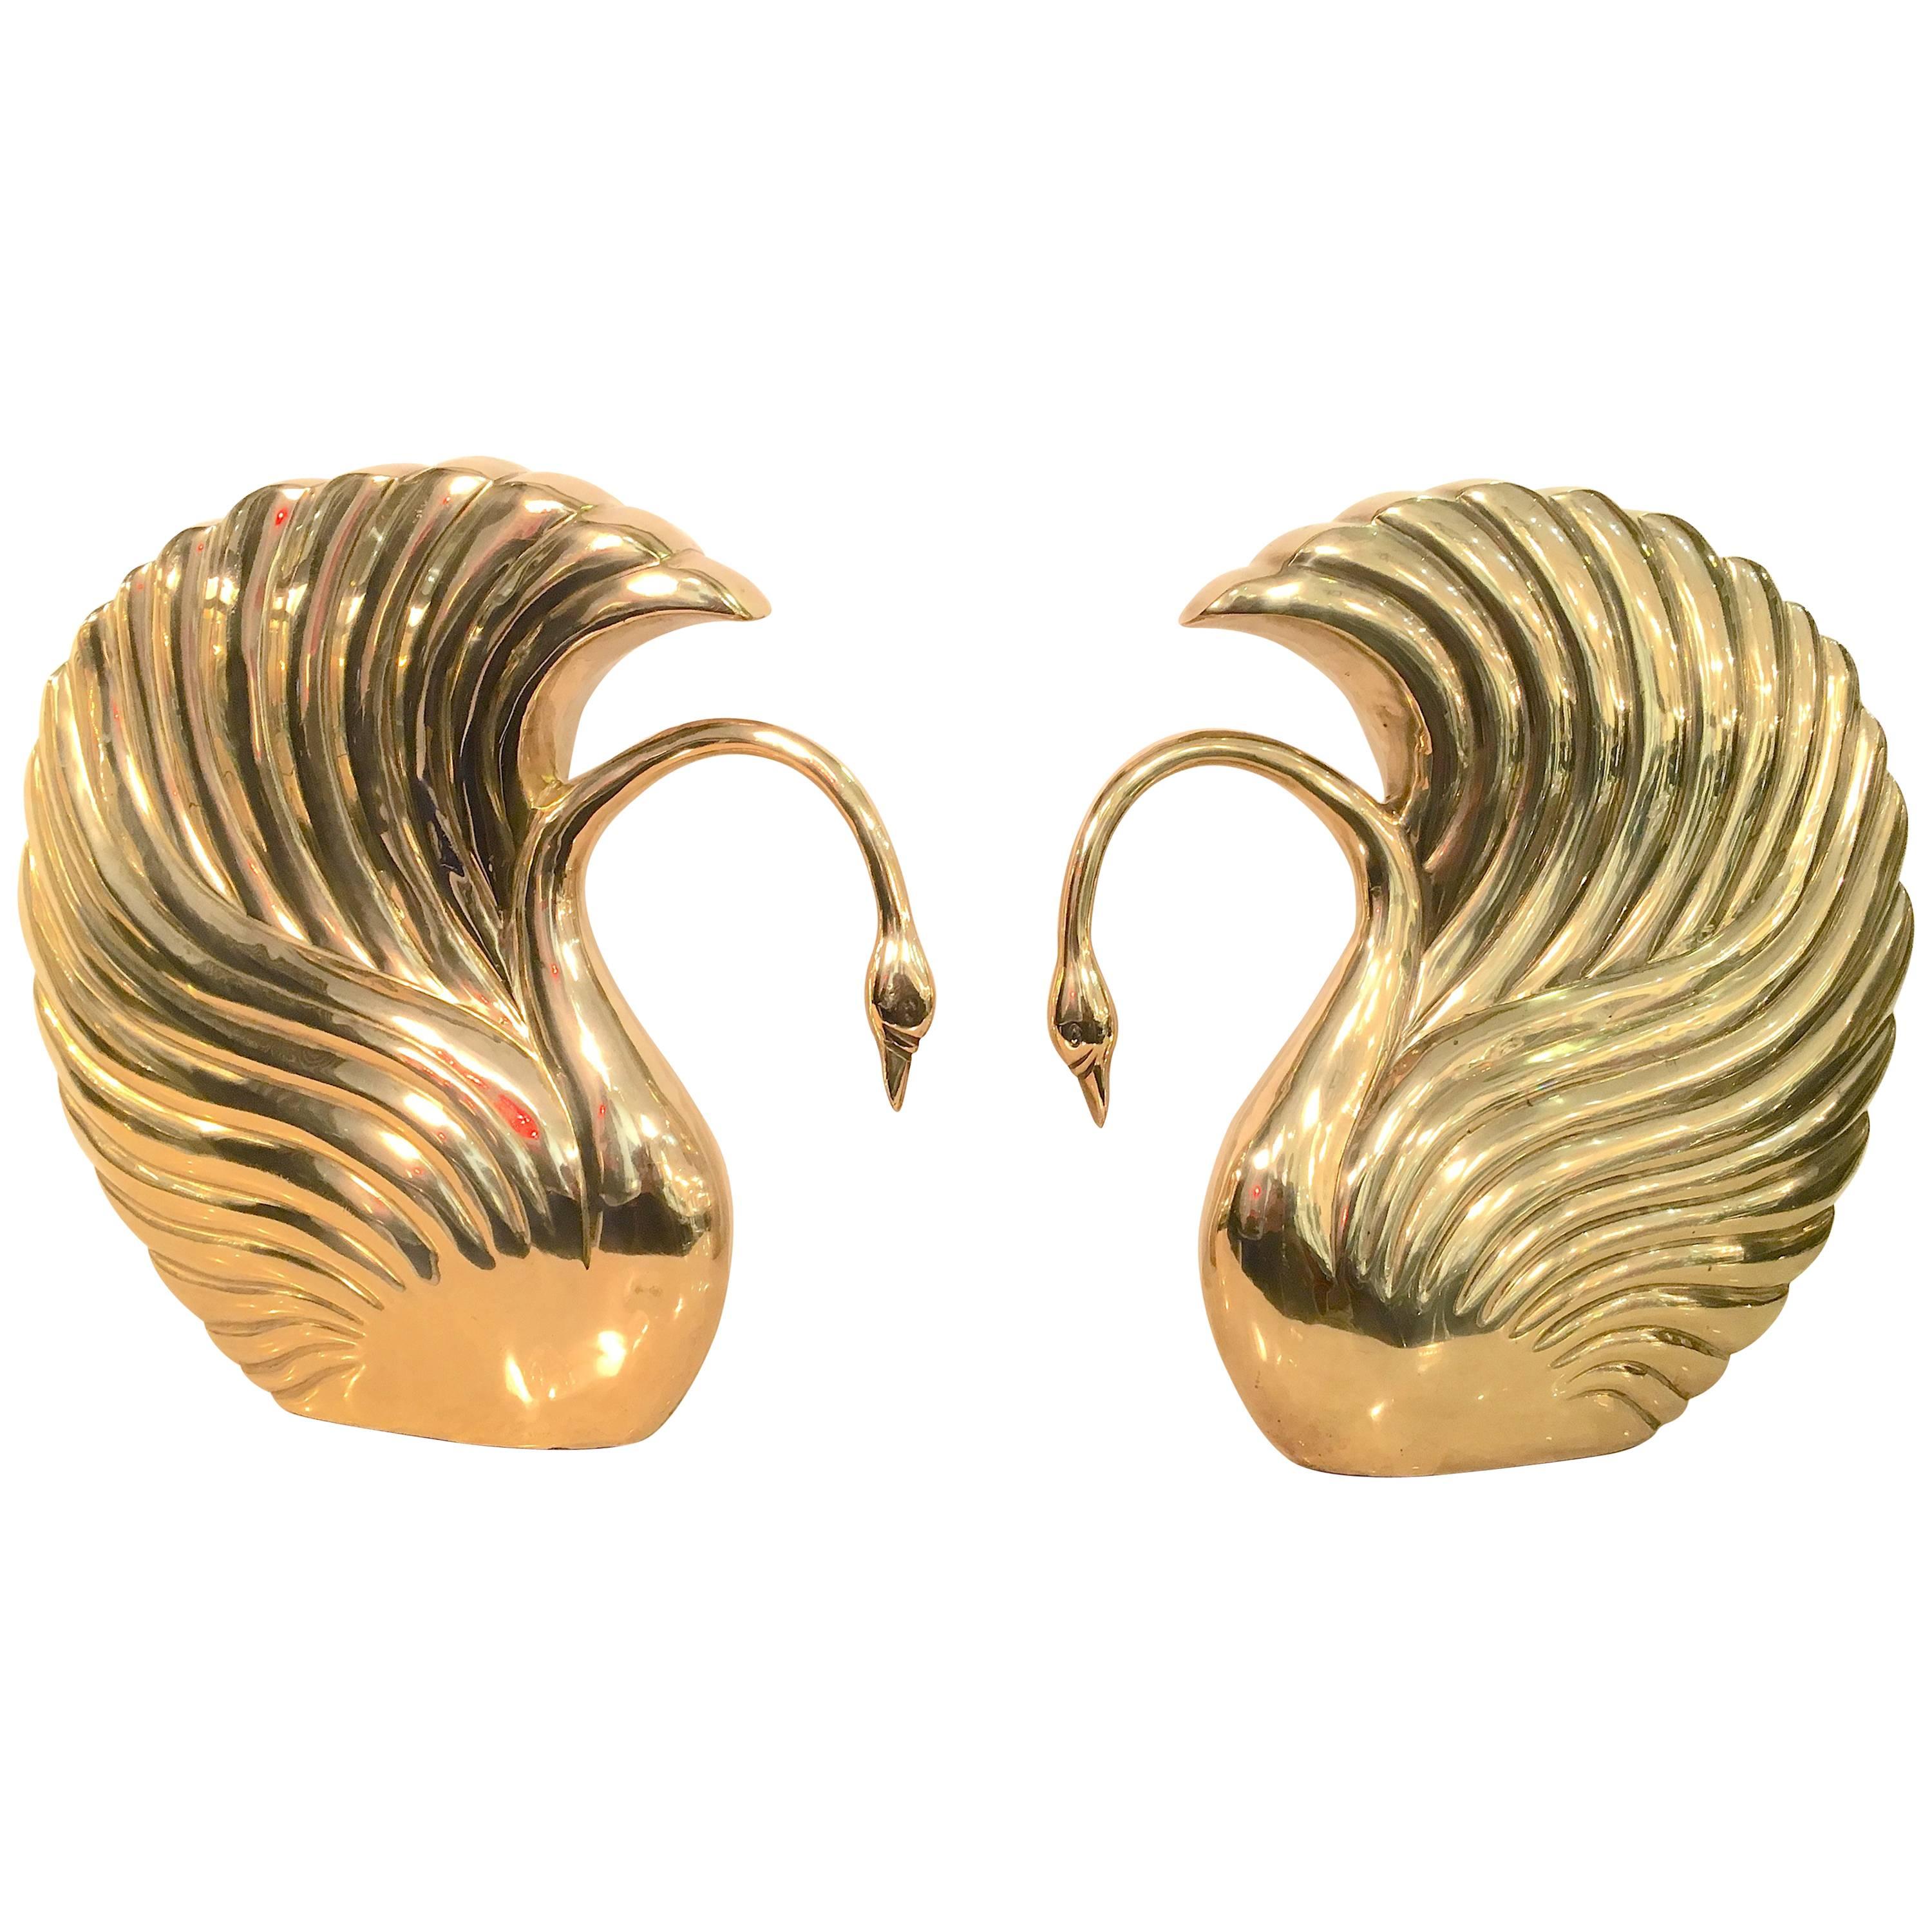 Pair of Grand Scale Art Deco Revival Brass Swans by Dolbi Cashier For Sale